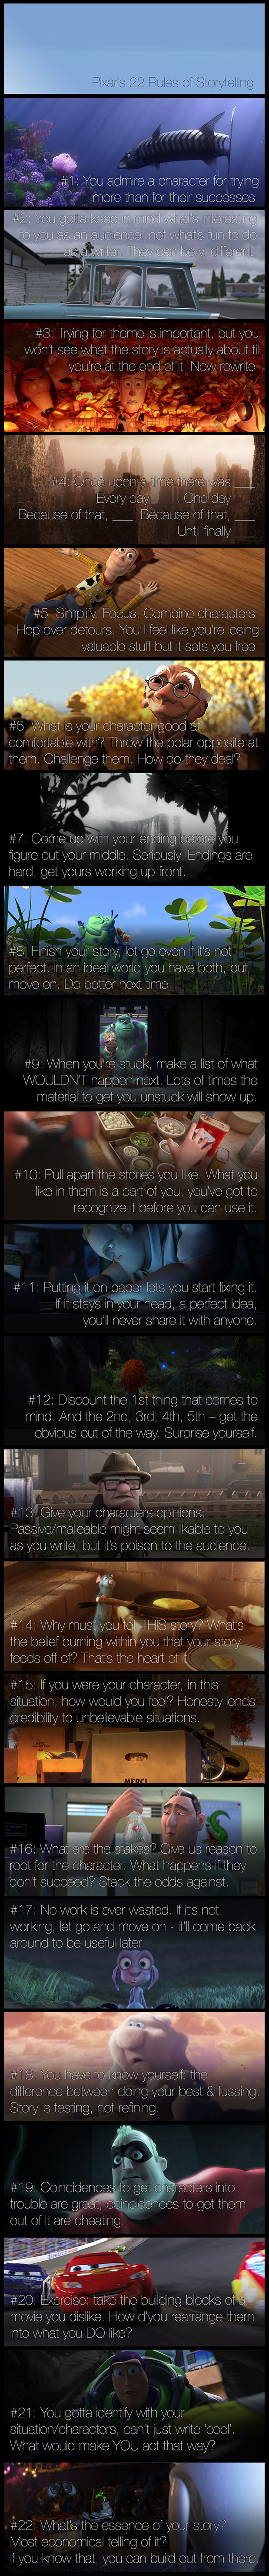 Pixar-22-Rules-of-Storytelling-Infographic1